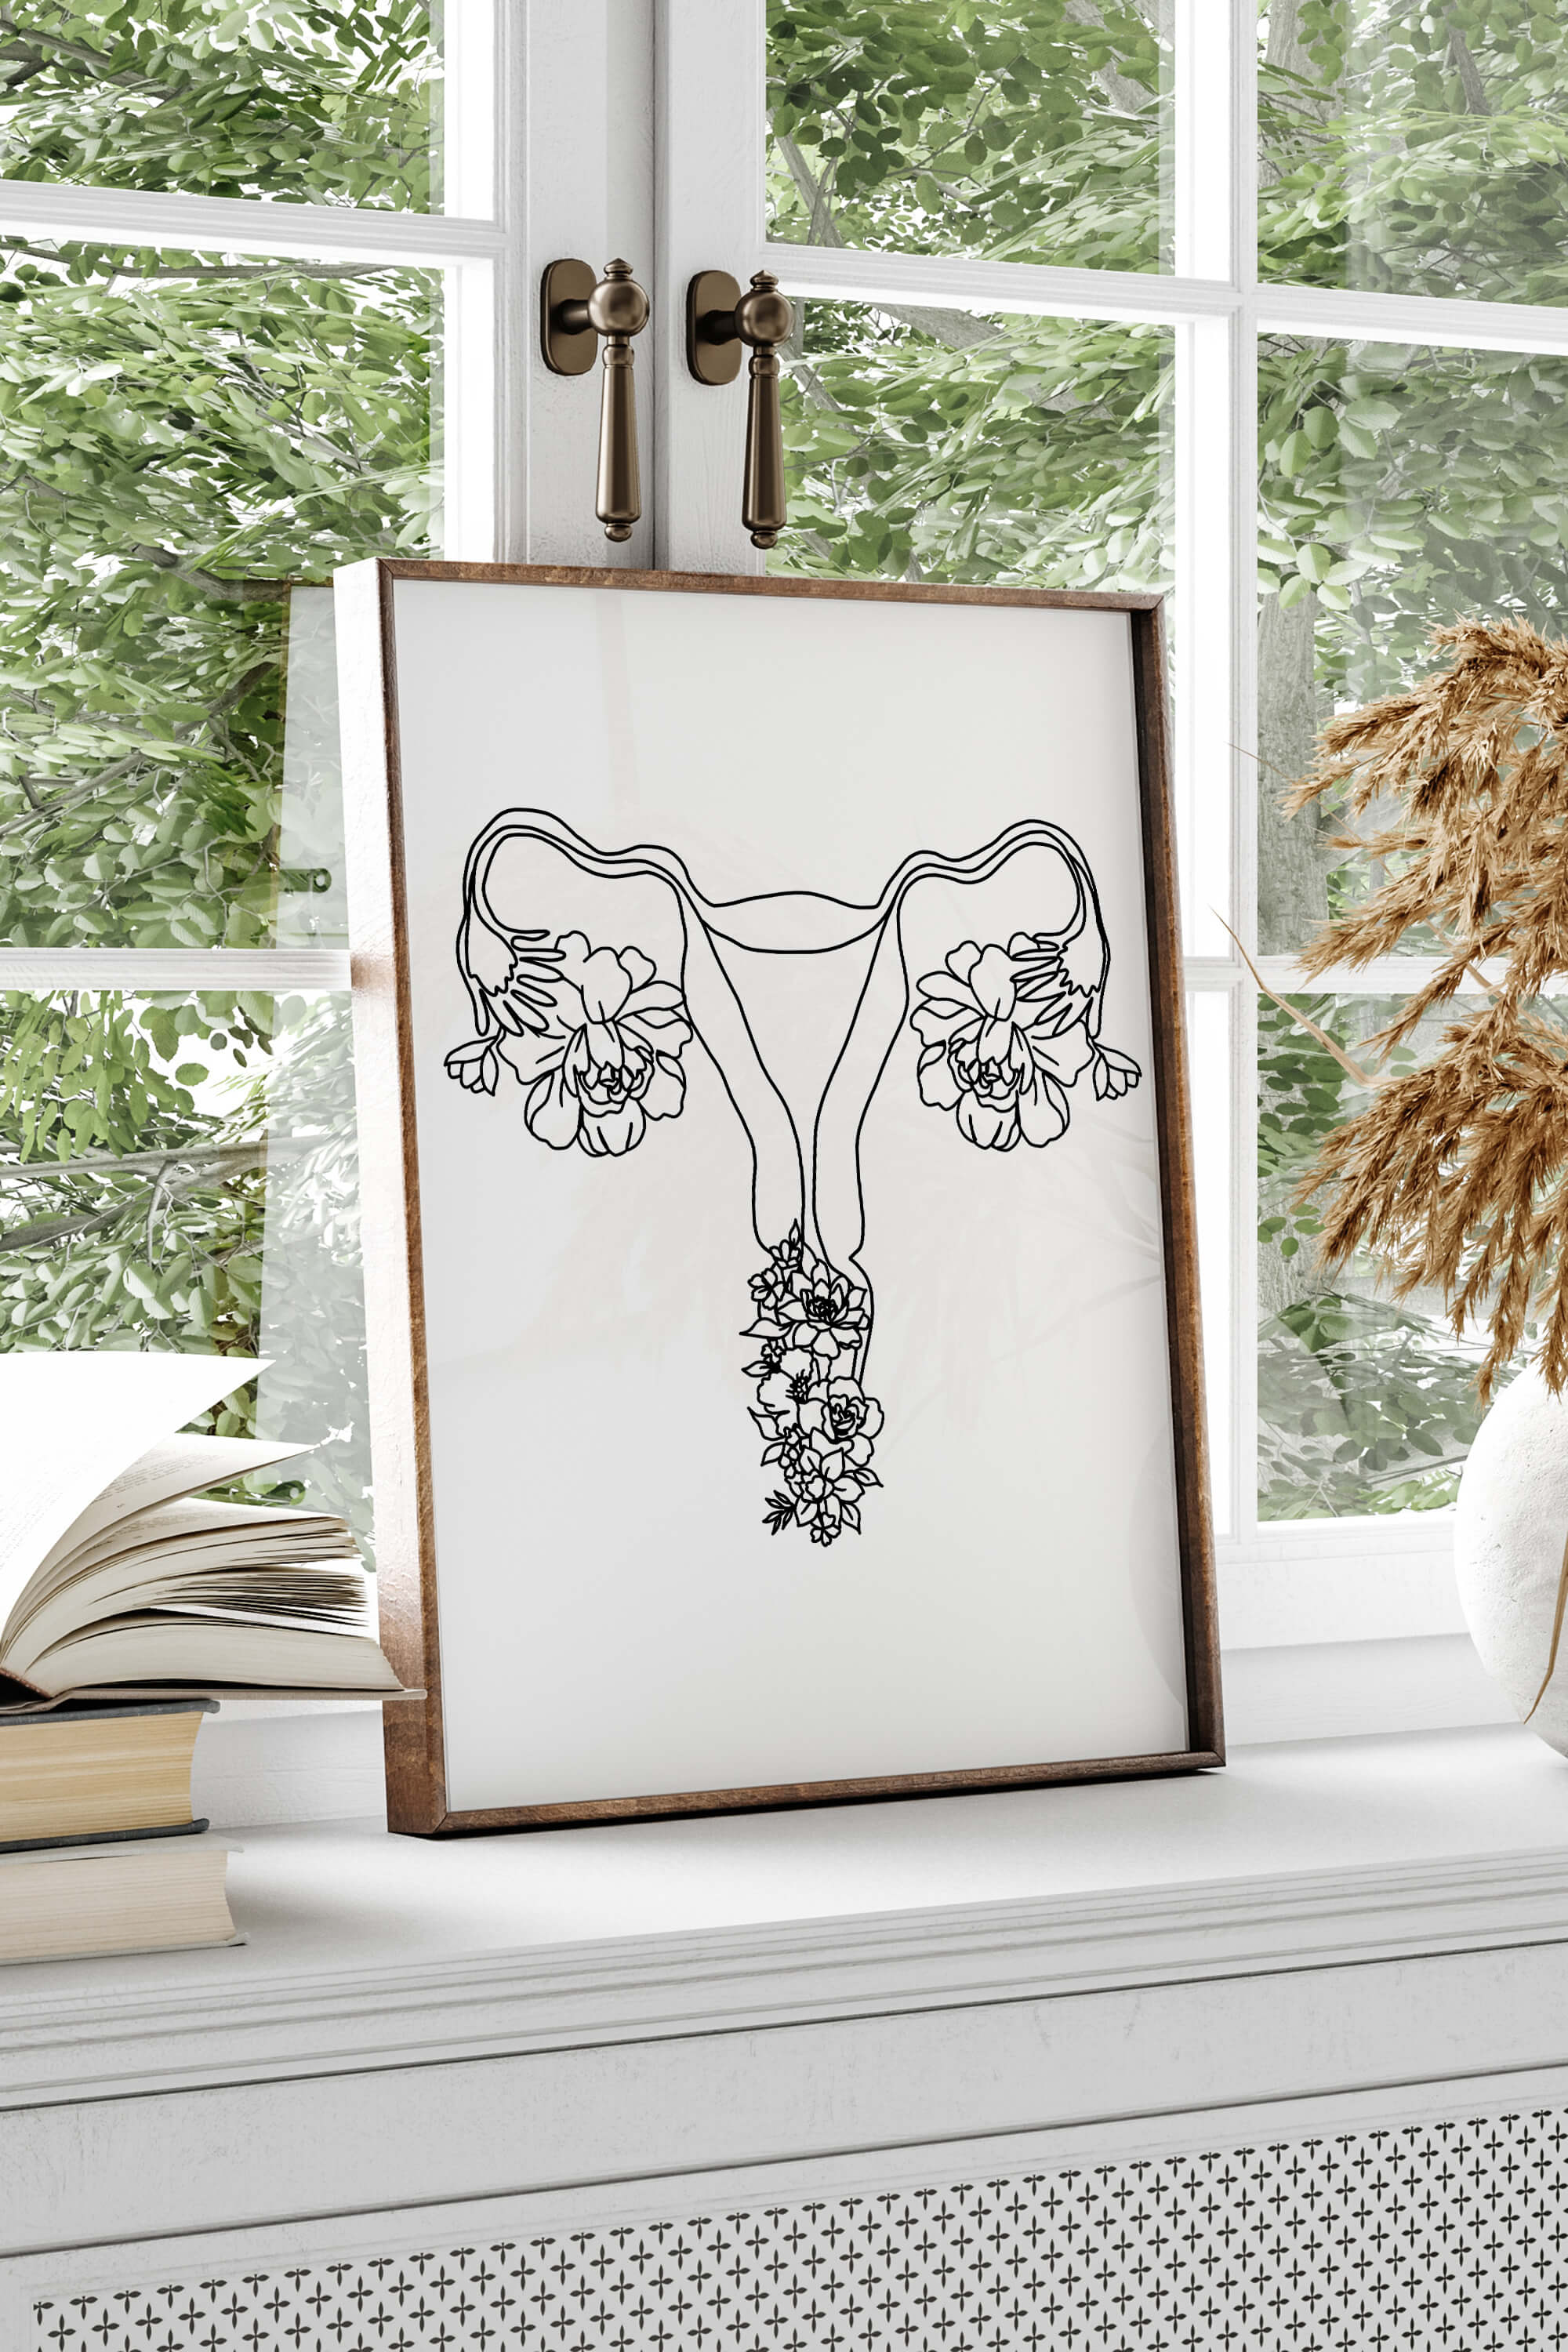 Monochrome Uterine Line Drawing. A striking and symbolic representation of female empowerment, combining simplicity with profound meaning.